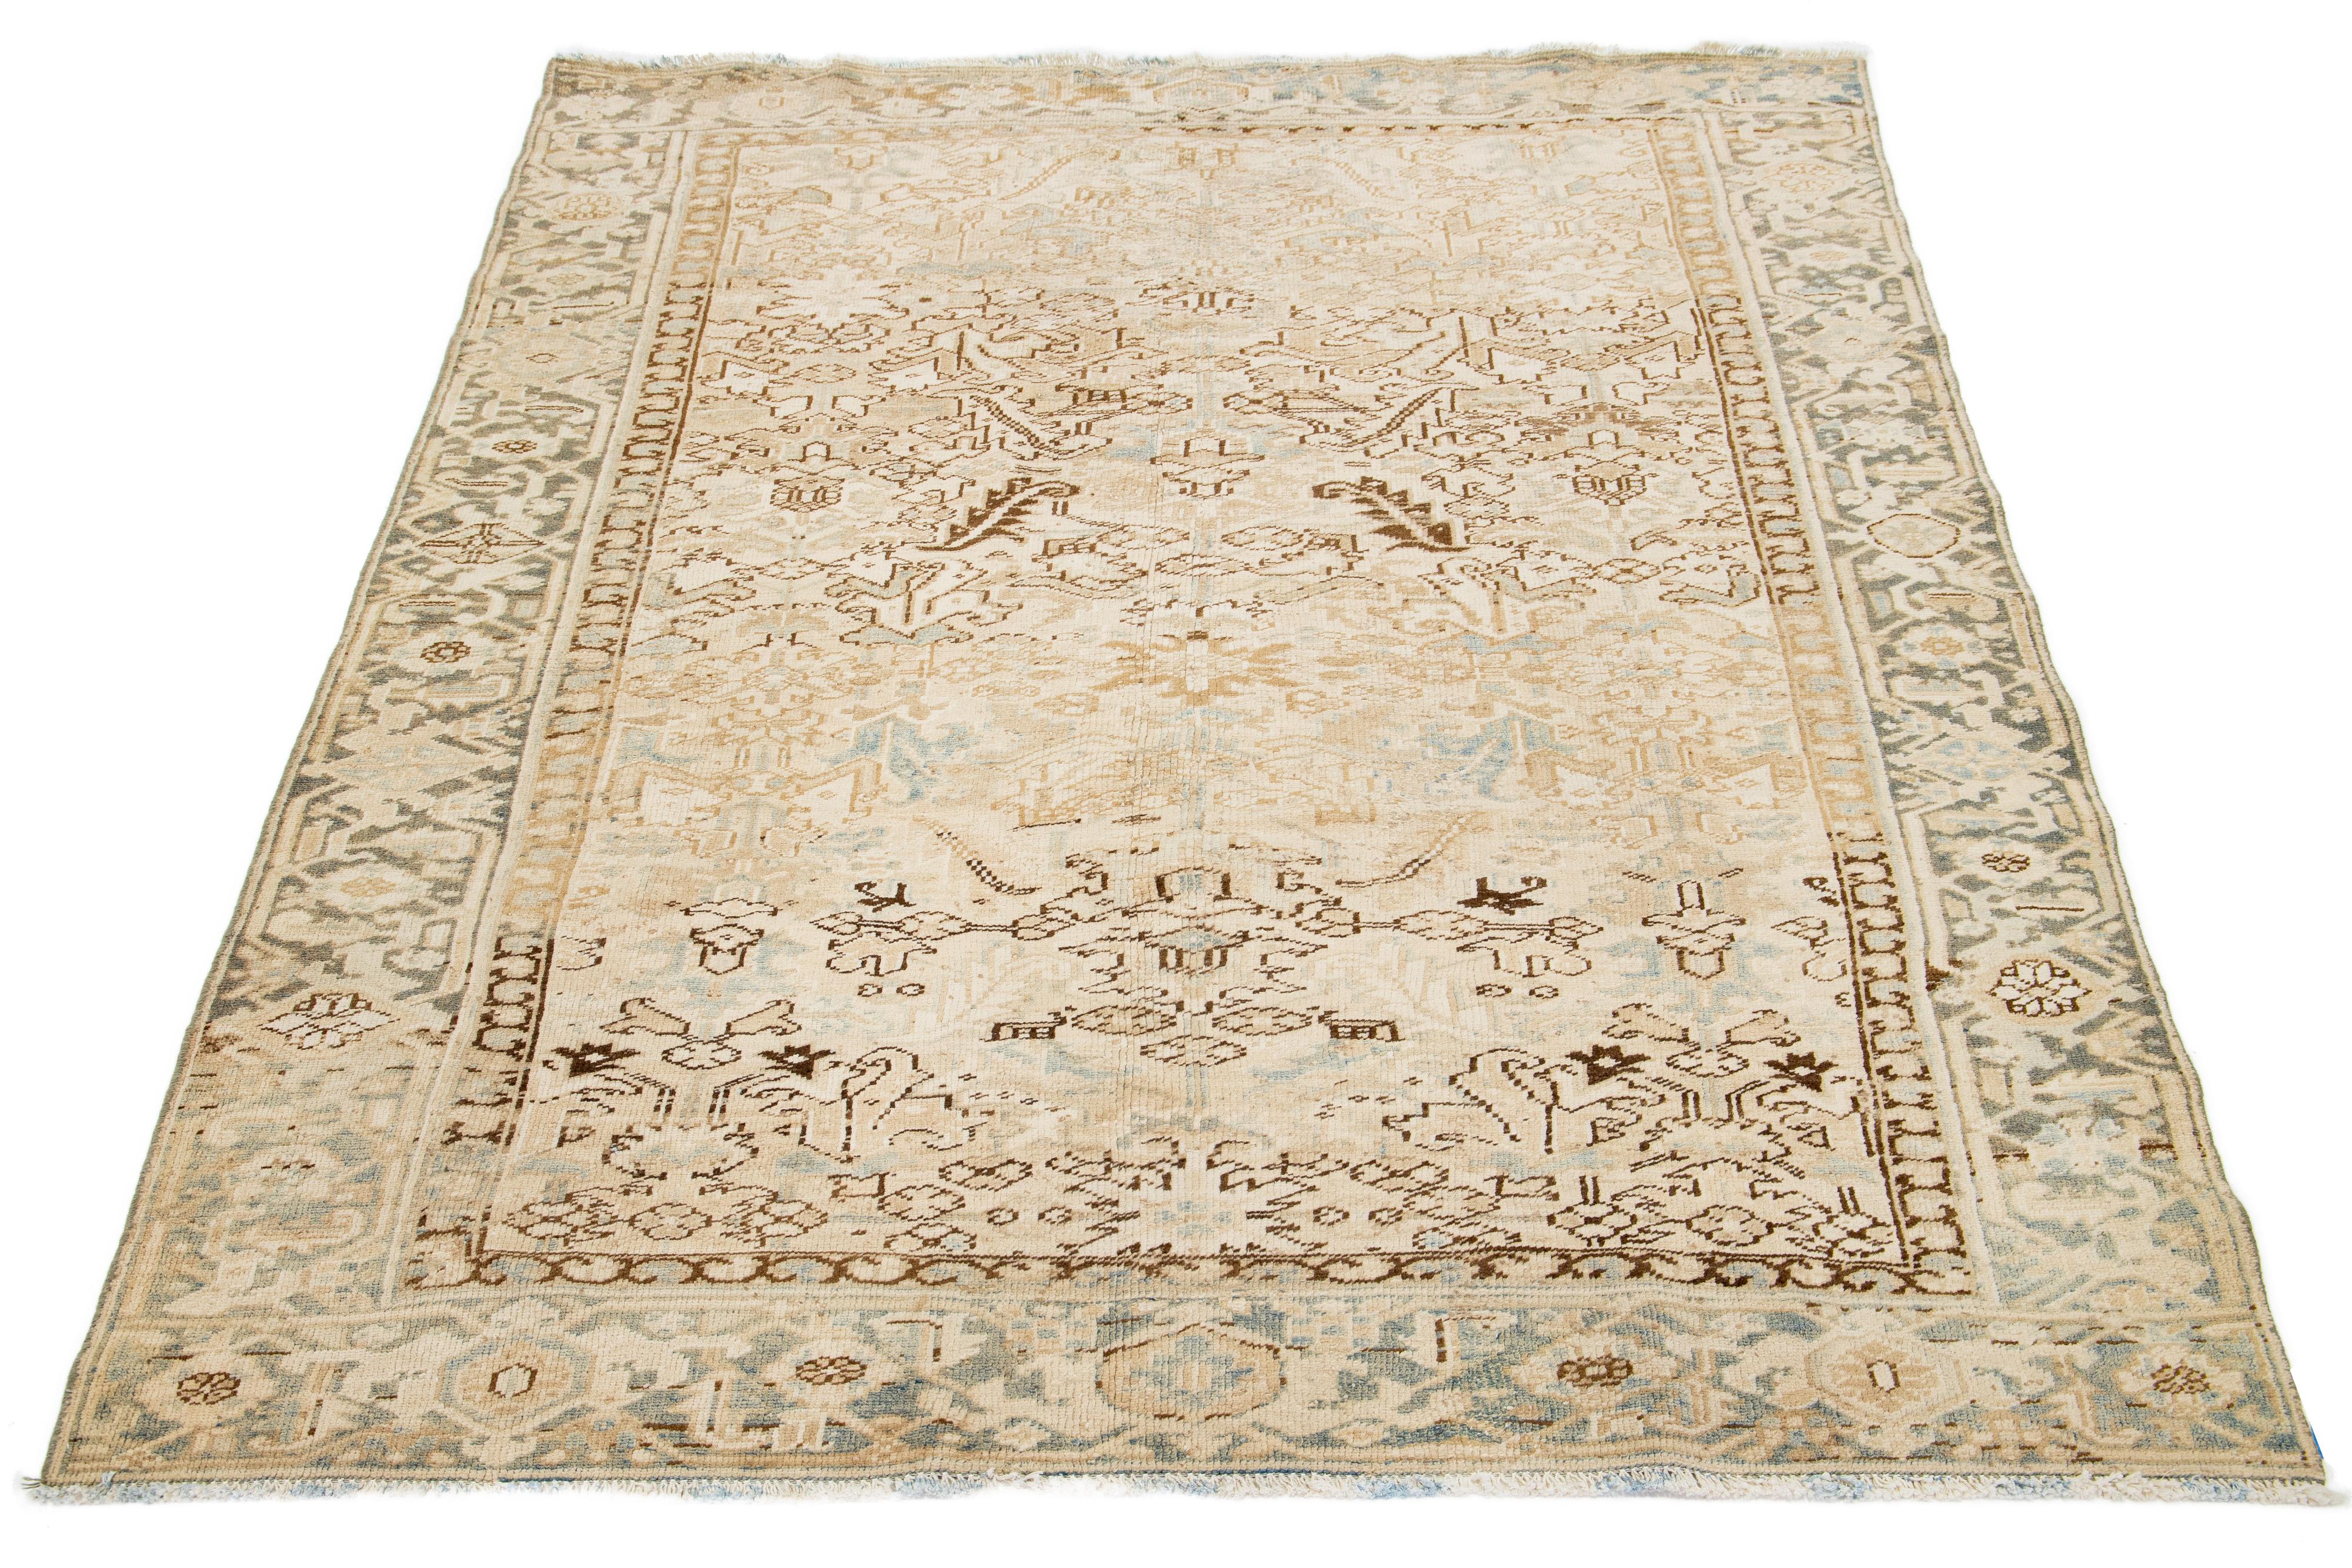 An antique Heriz rug from Persia features a beige field with a blue and brown all-over pattern, hand-knotted using wool.

This rug measures 6'9' x 9'1